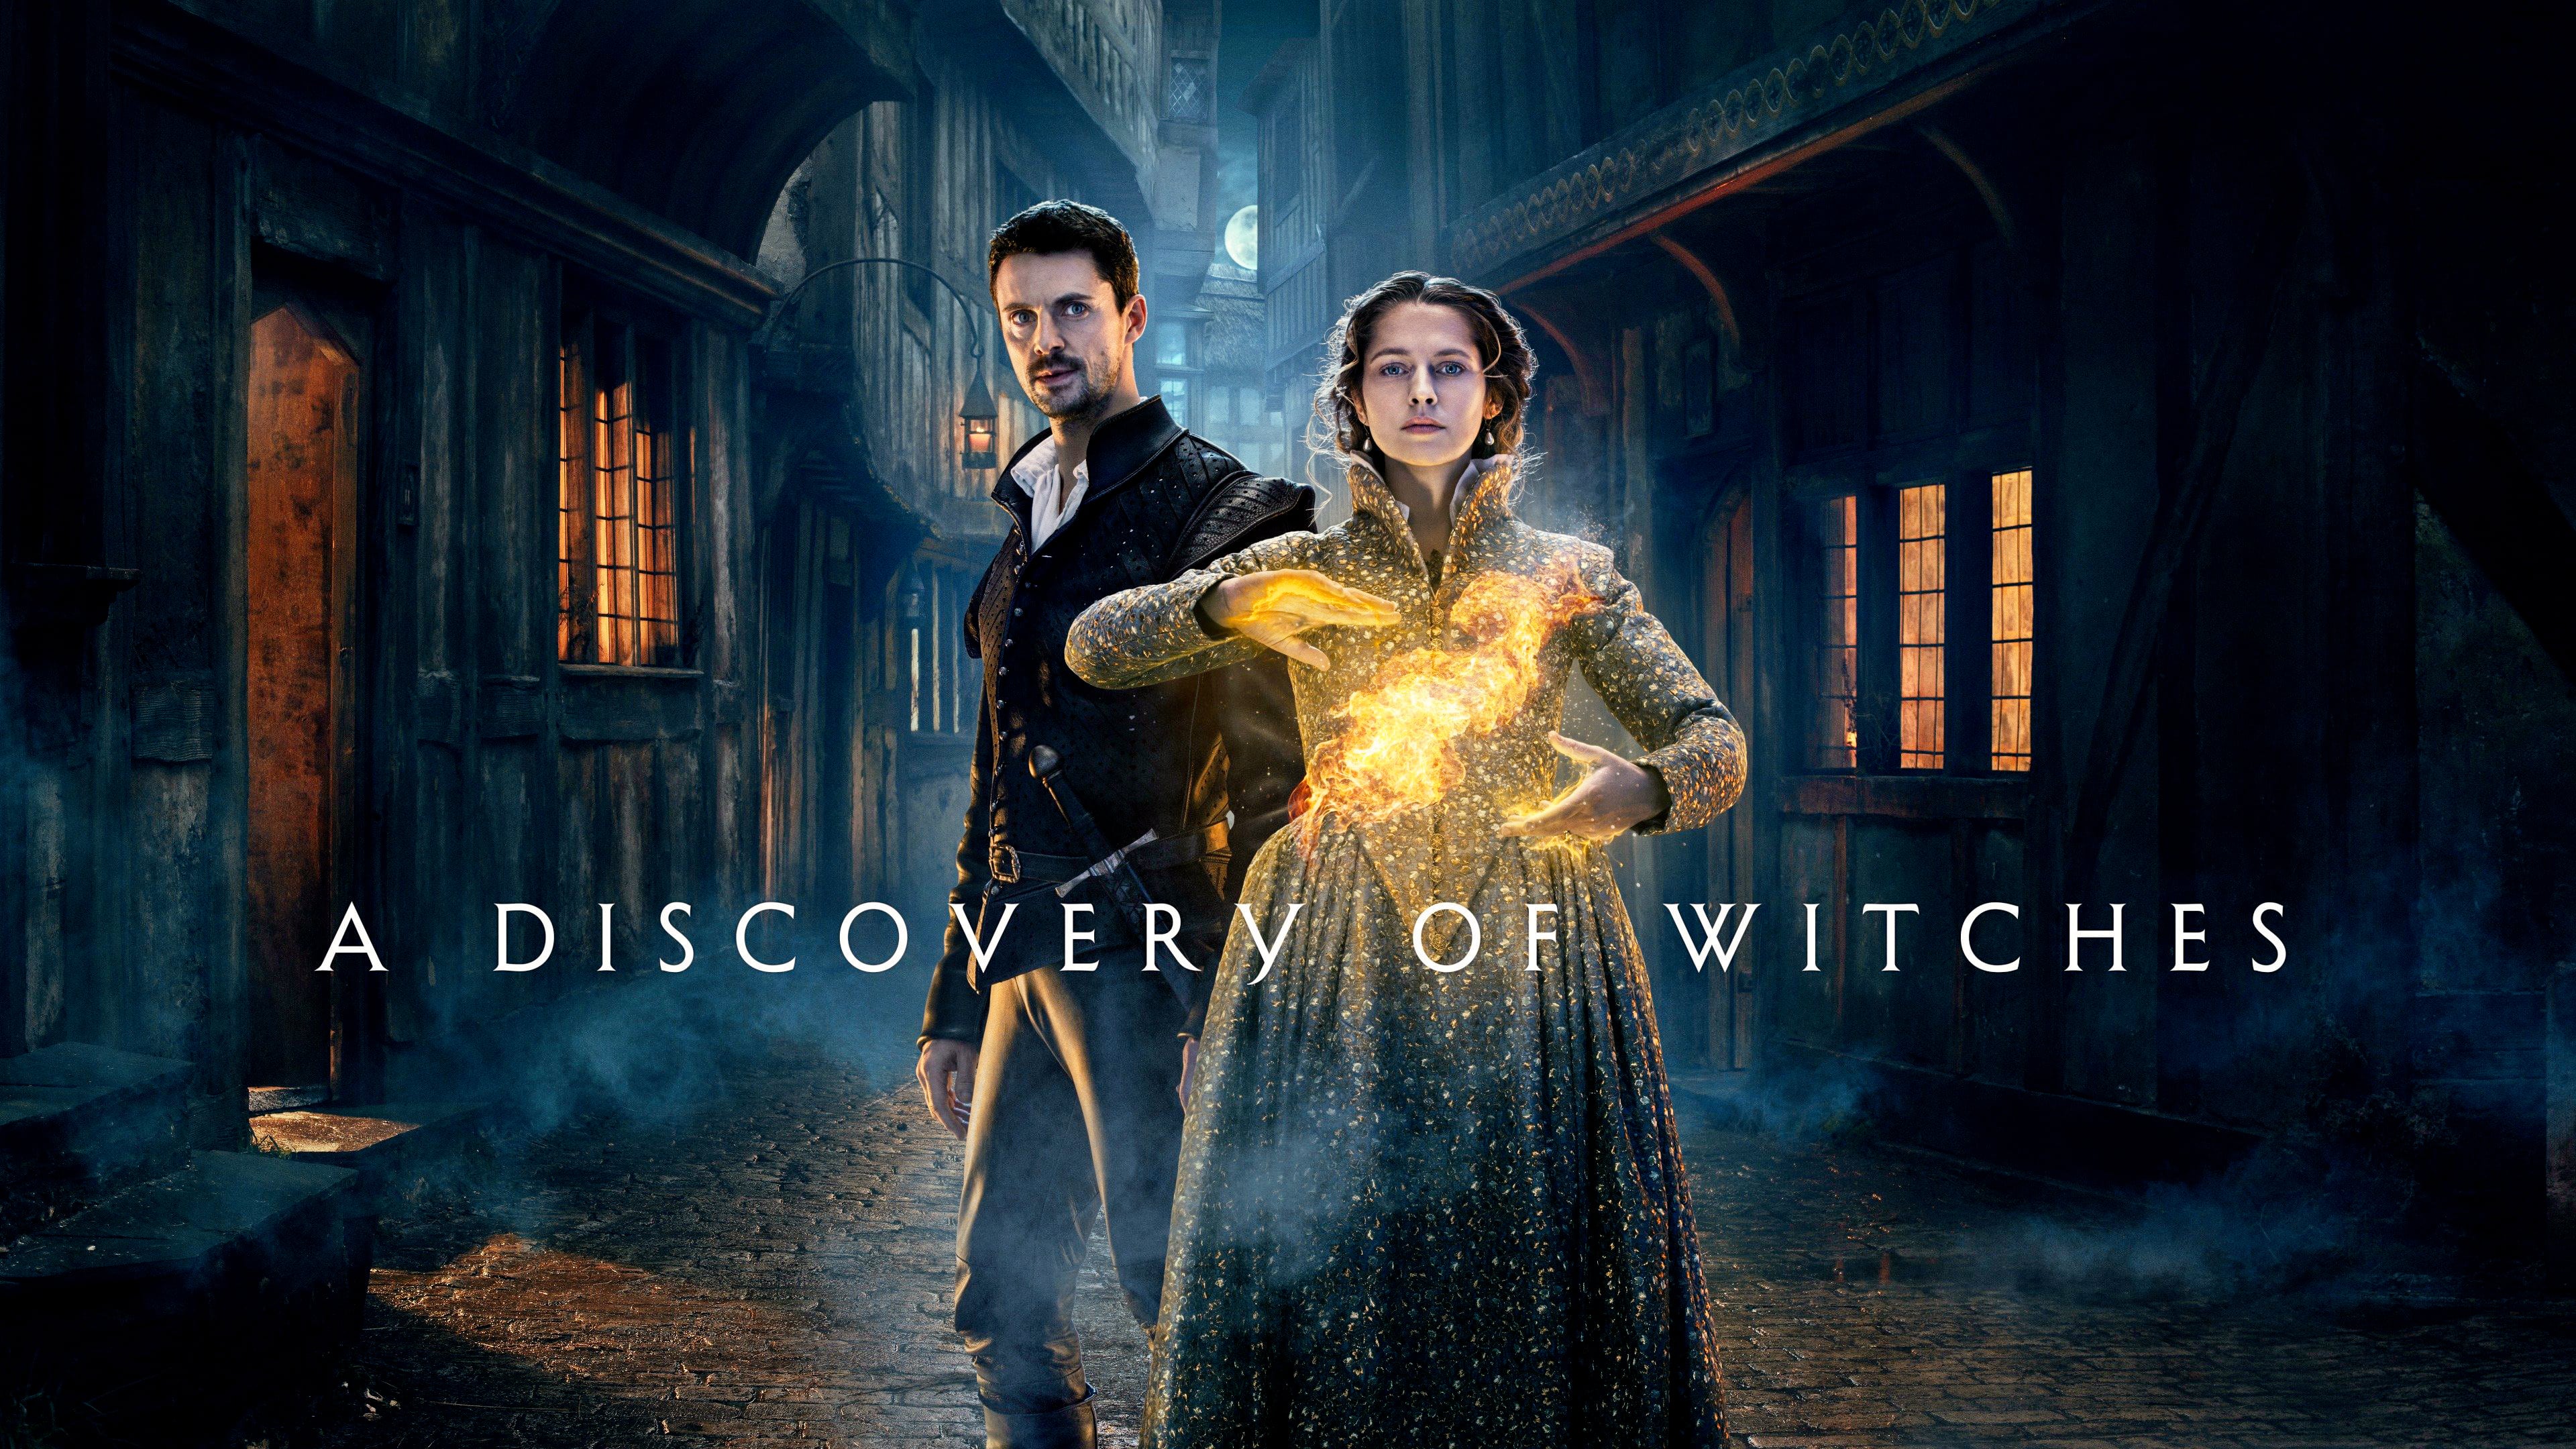 Watch A Discovery of Witches Full HD Quality Online Free | PUTLOCKER